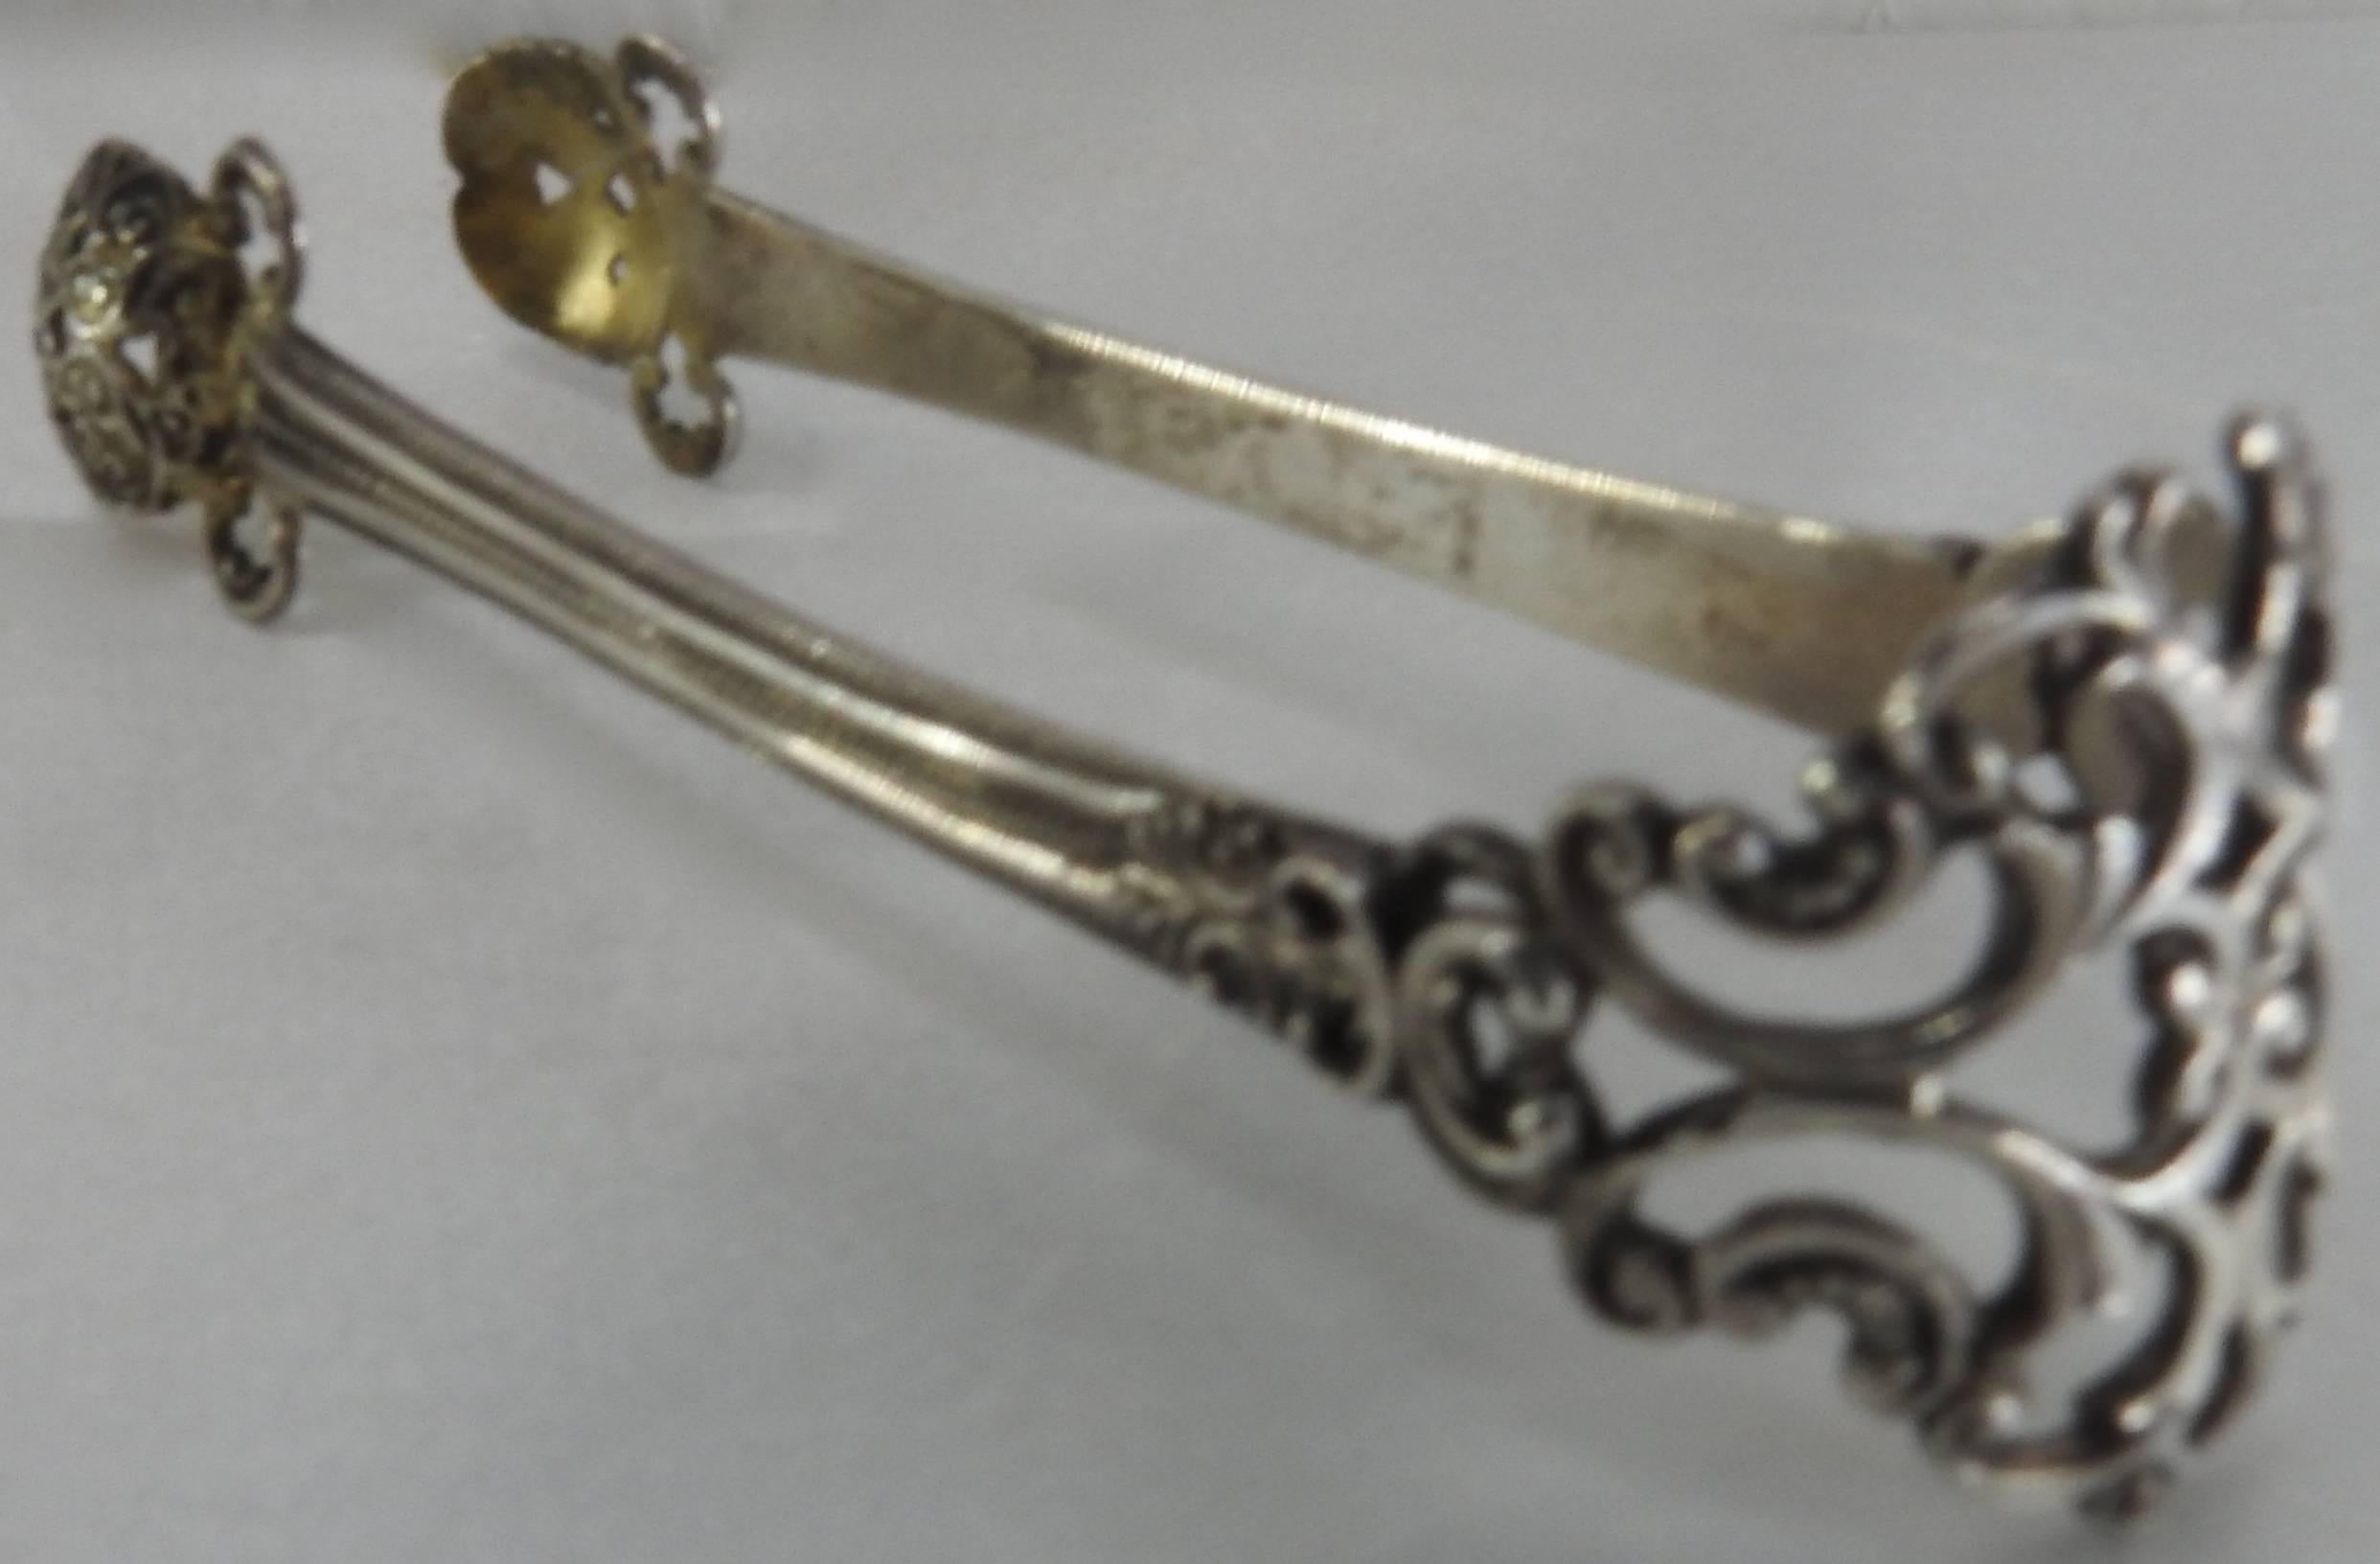 A delicate pair of vintage sterling silver tongs. This pair of small ice tongs features pierced accents and milgrain detailing marked “Sterling” to the centre.
 